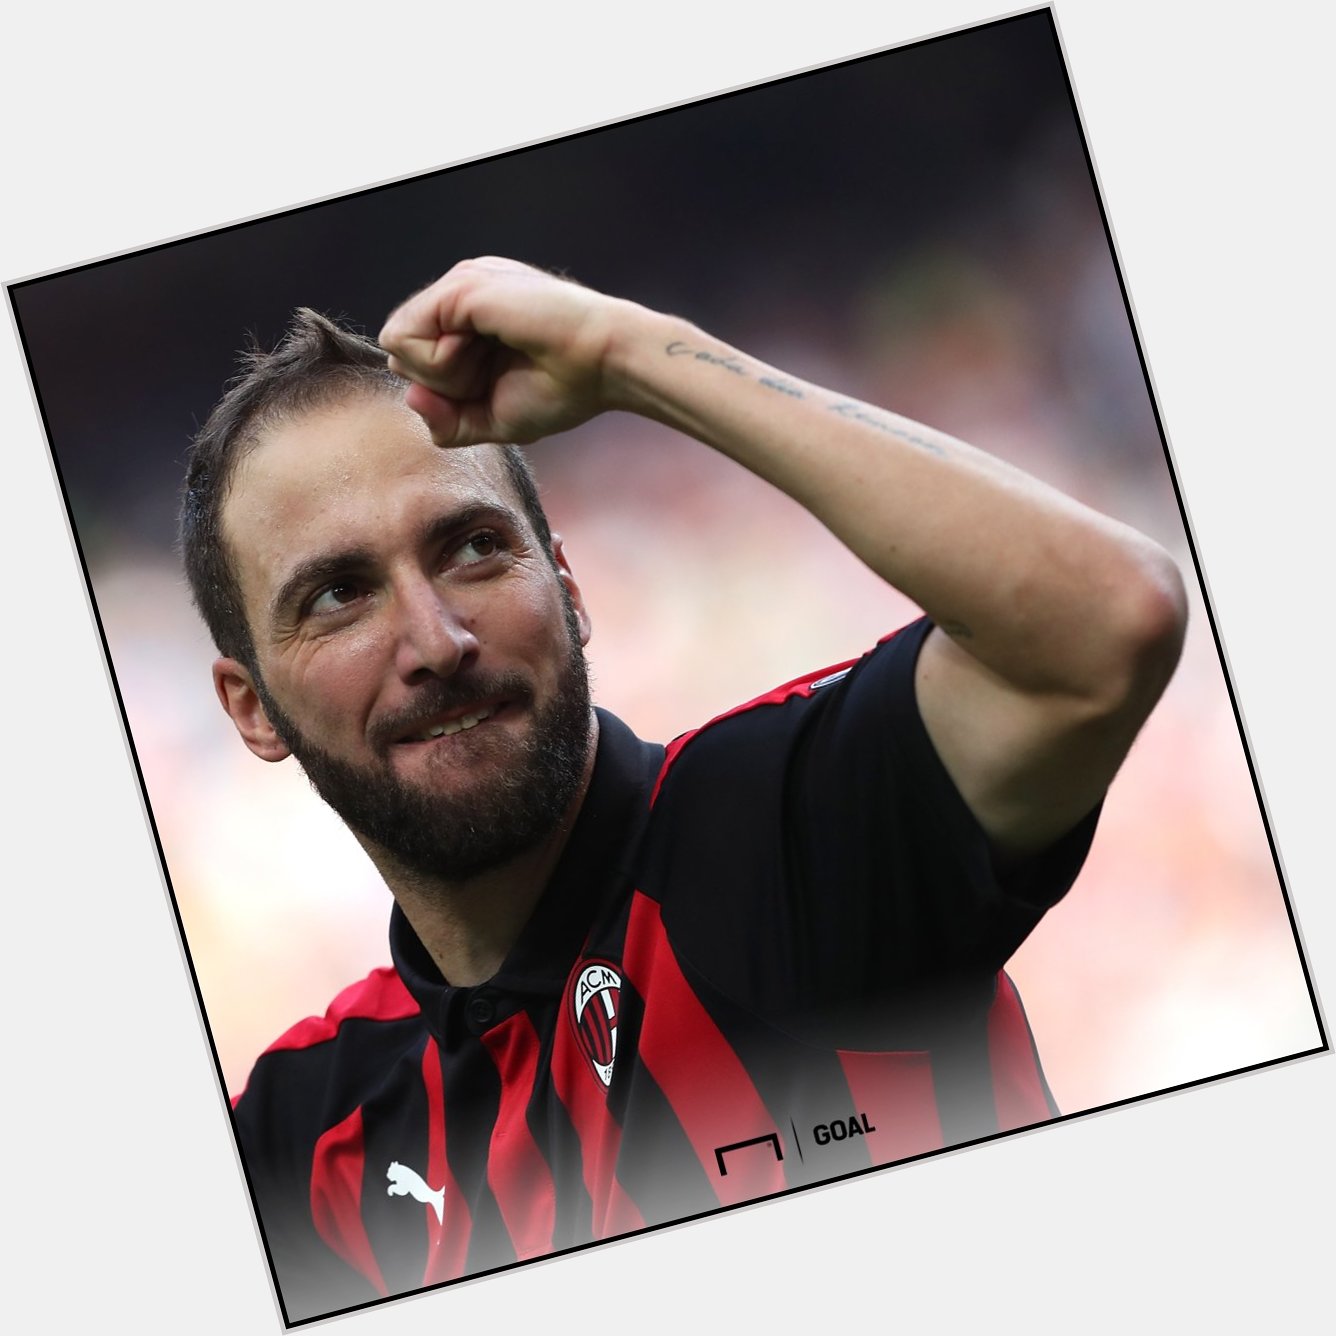 Happy Birthday, gonzalo higuain.   646 games  320 goals 12 trophies

A success wherever he goes. 